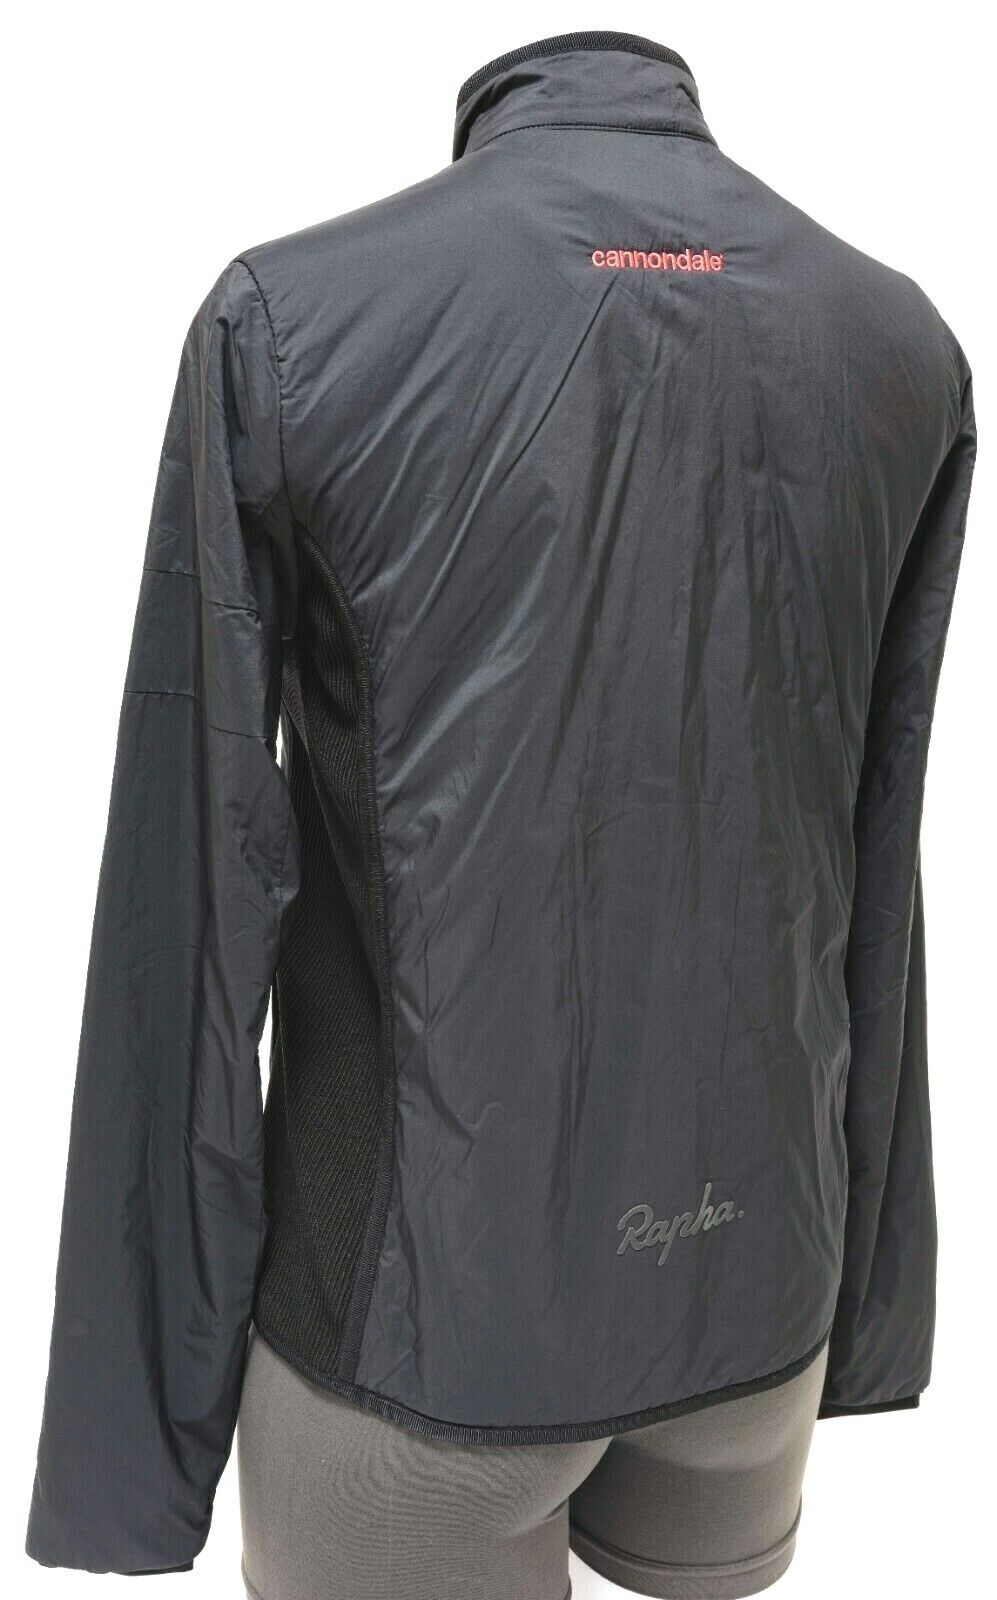 Rapha EF Education First Pro Cycling Transfer Jacket Women XS Black Cannondale